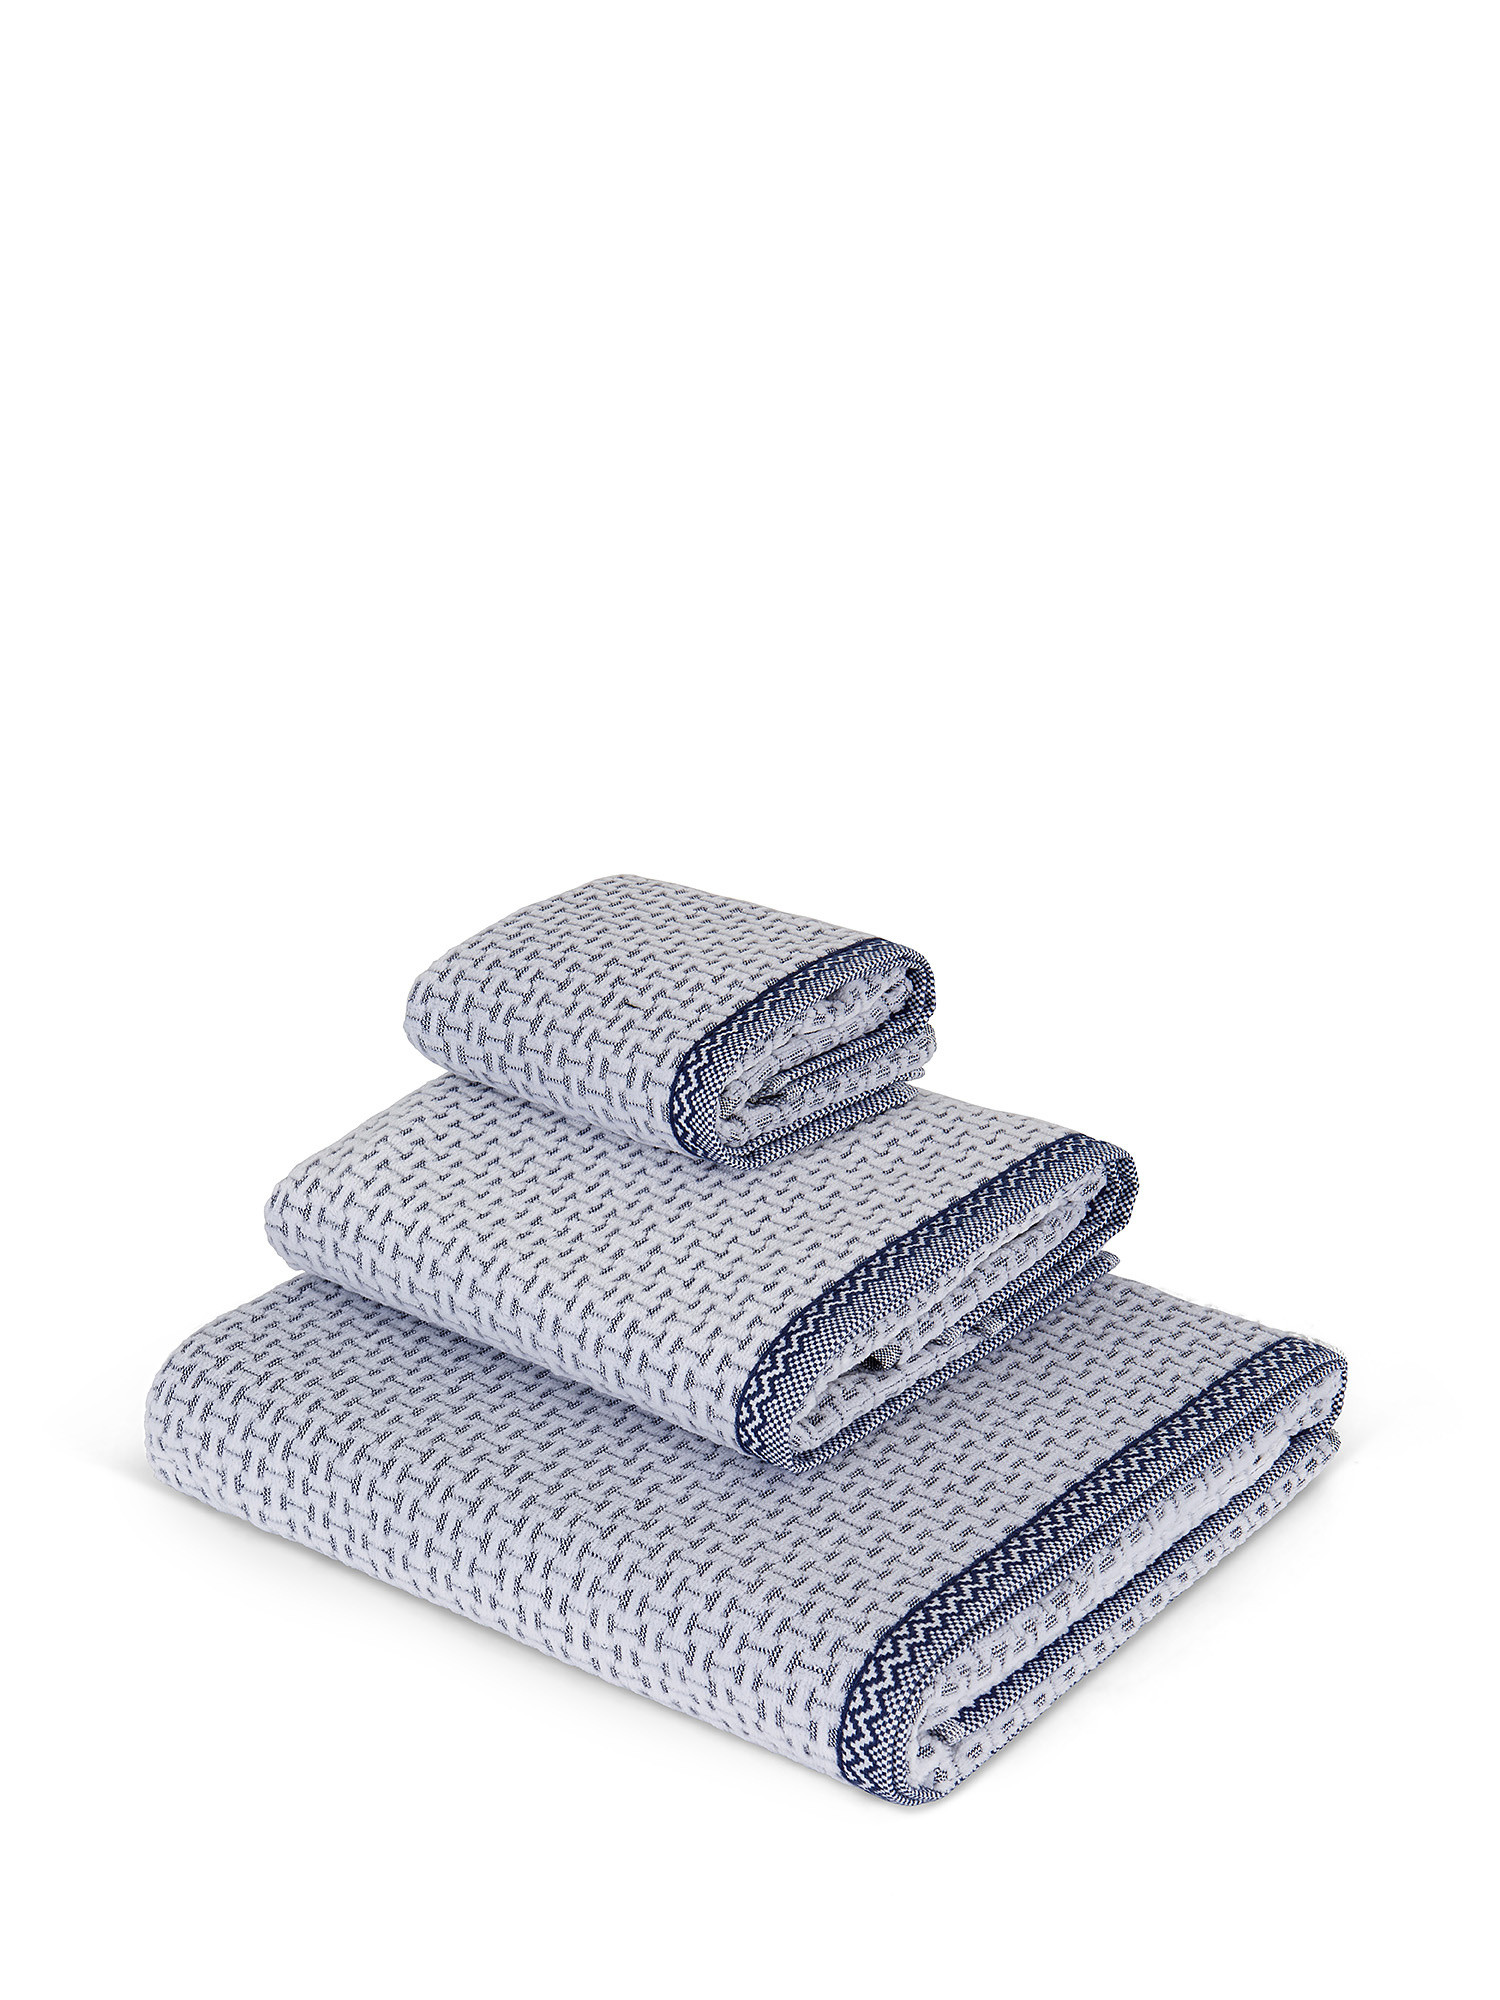 Cotton velor towel with woven pattern, Blue, large image number 0